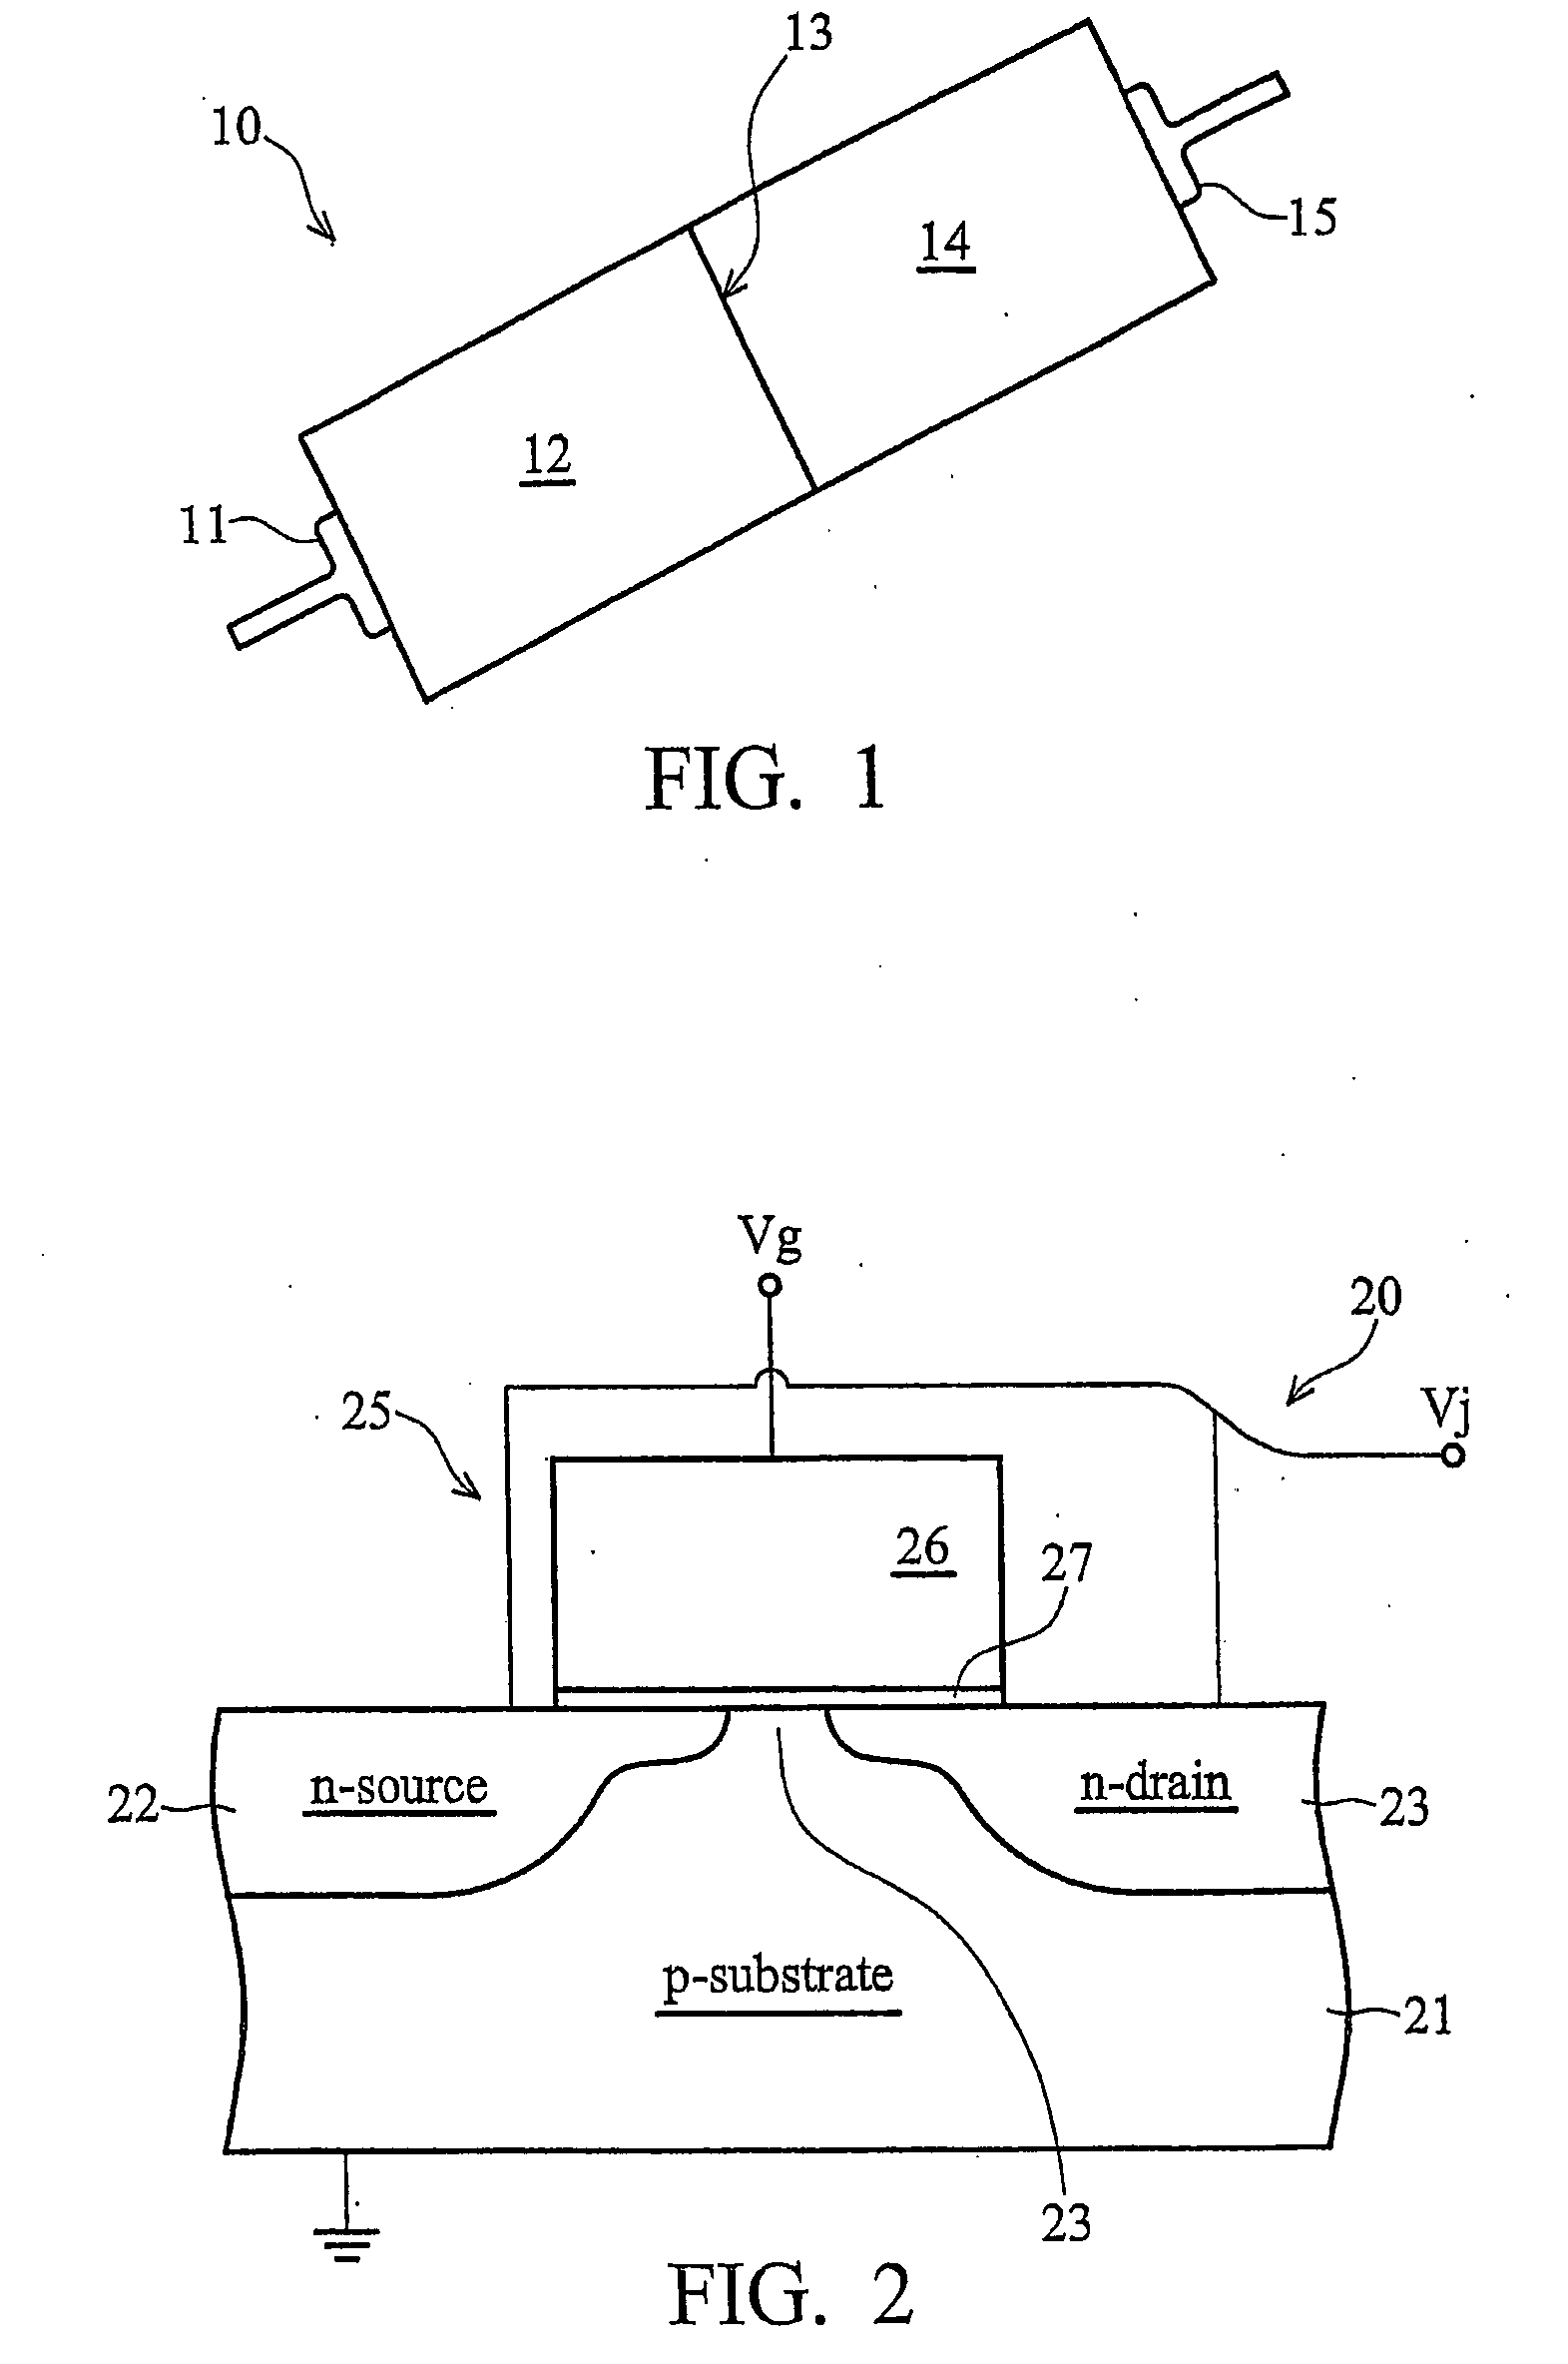 Gated diode with non-planar source region